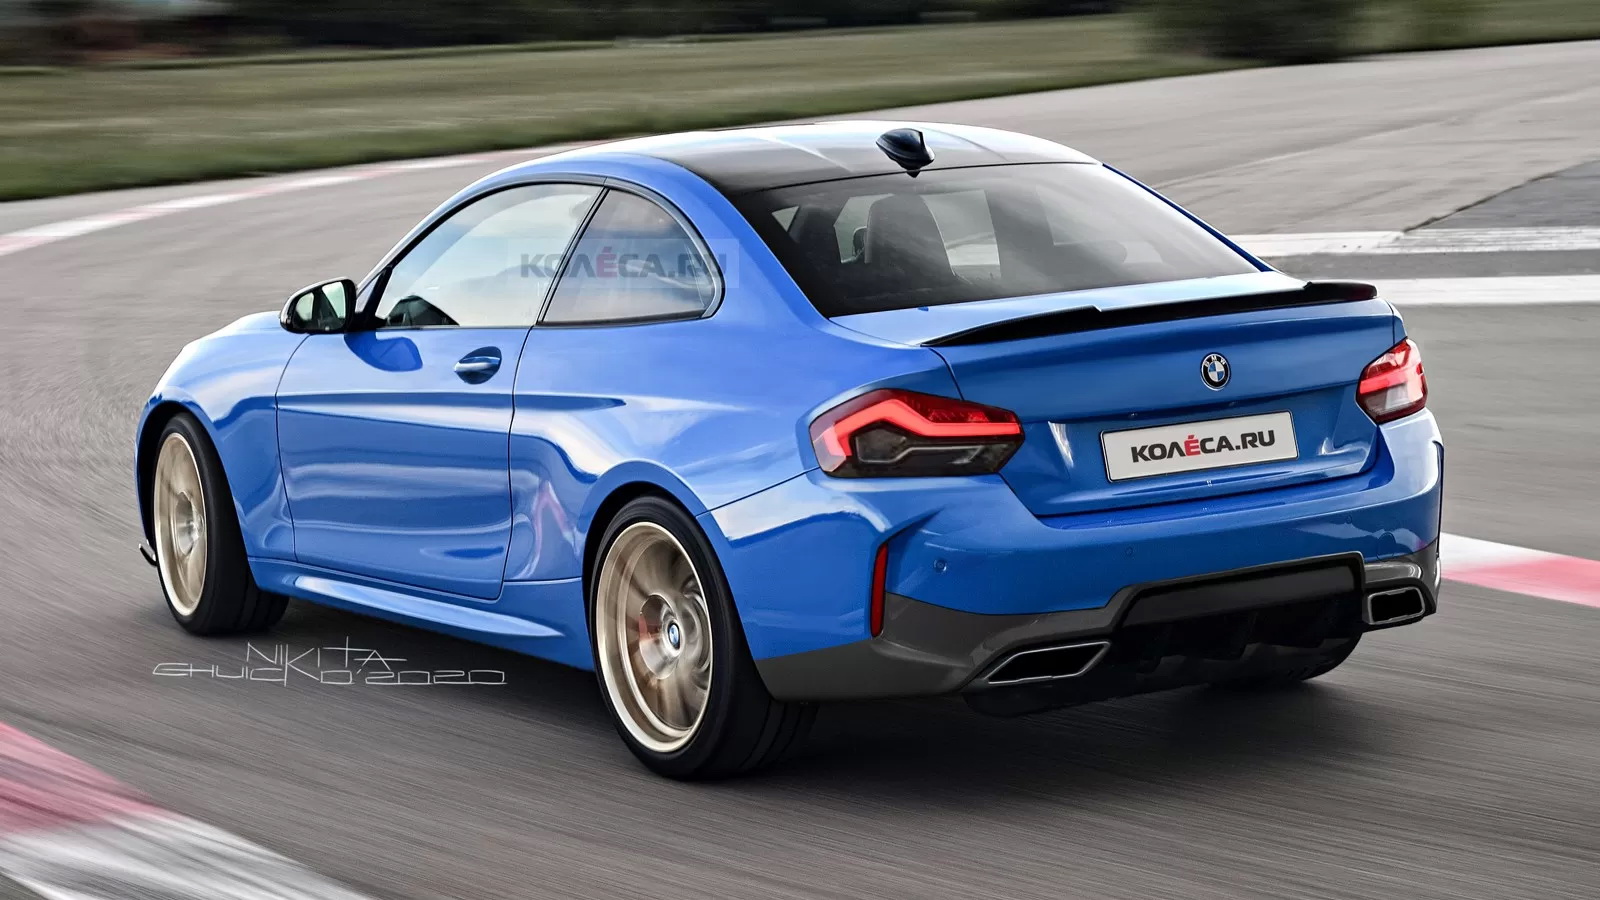 New 2021 BMW 2 Series Coupe: A Realistic Take Based On Leaked Image